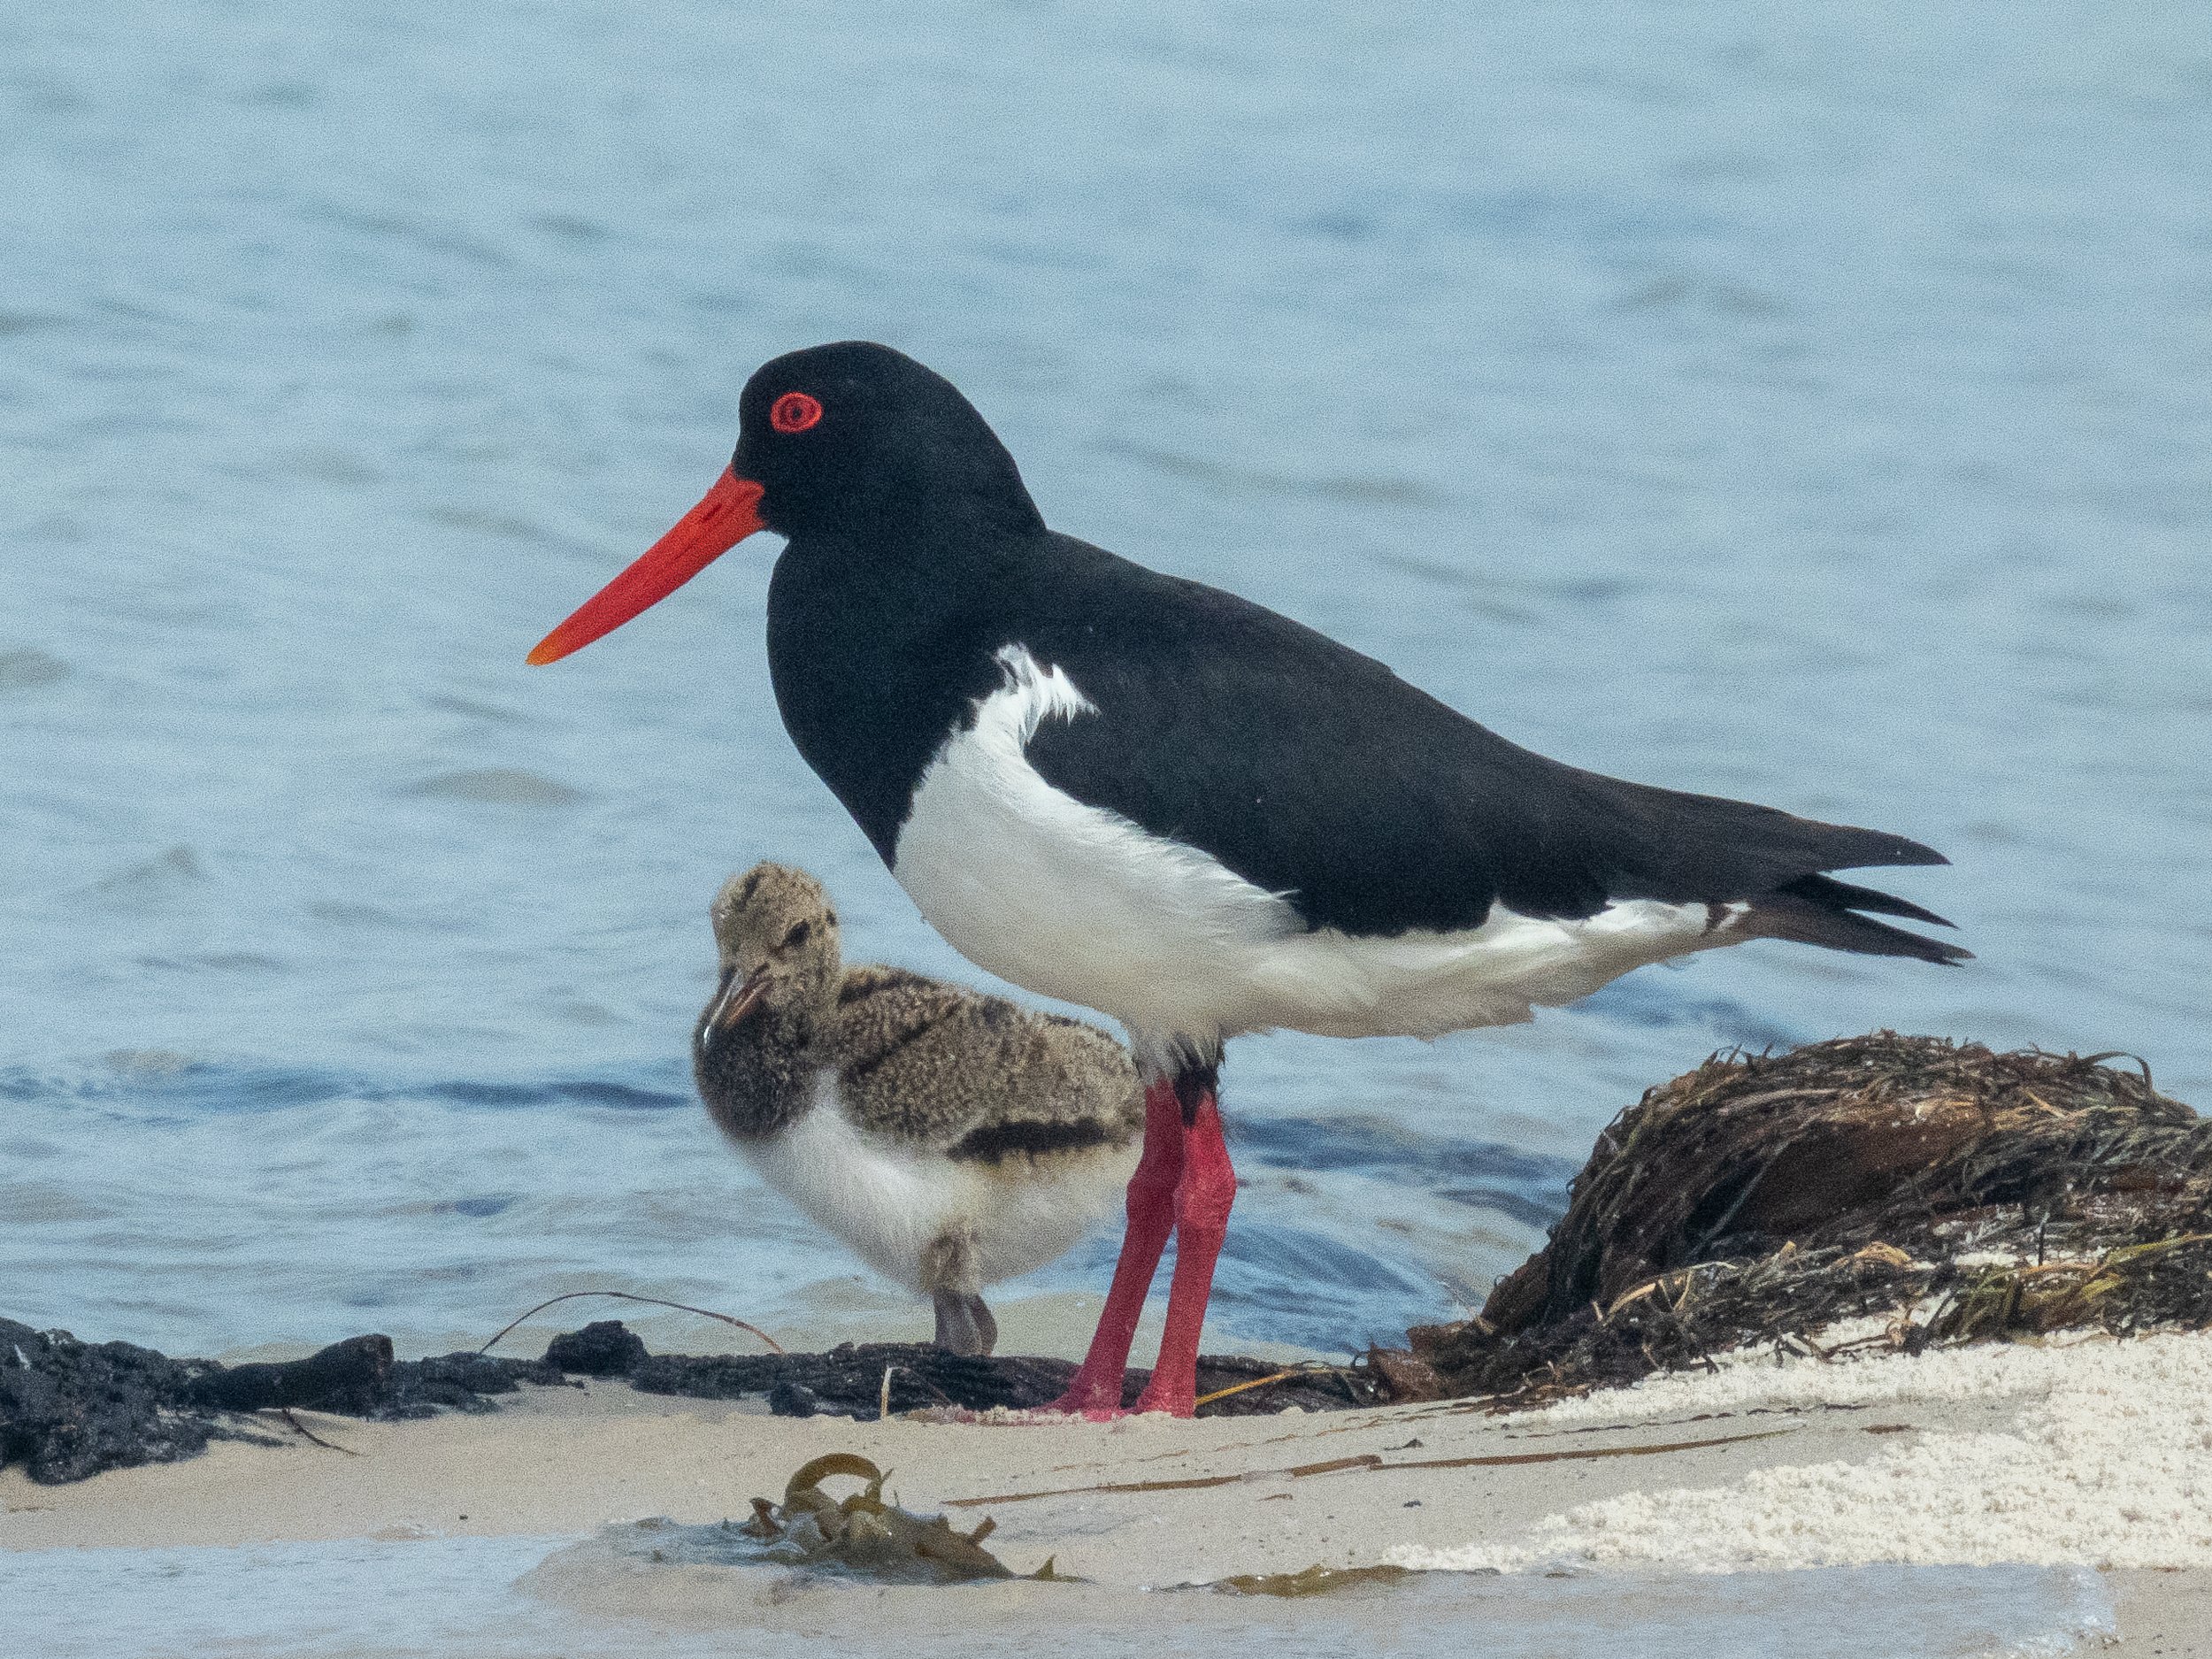  Pied oyster catcher (Haematopus longirostris) with chick 